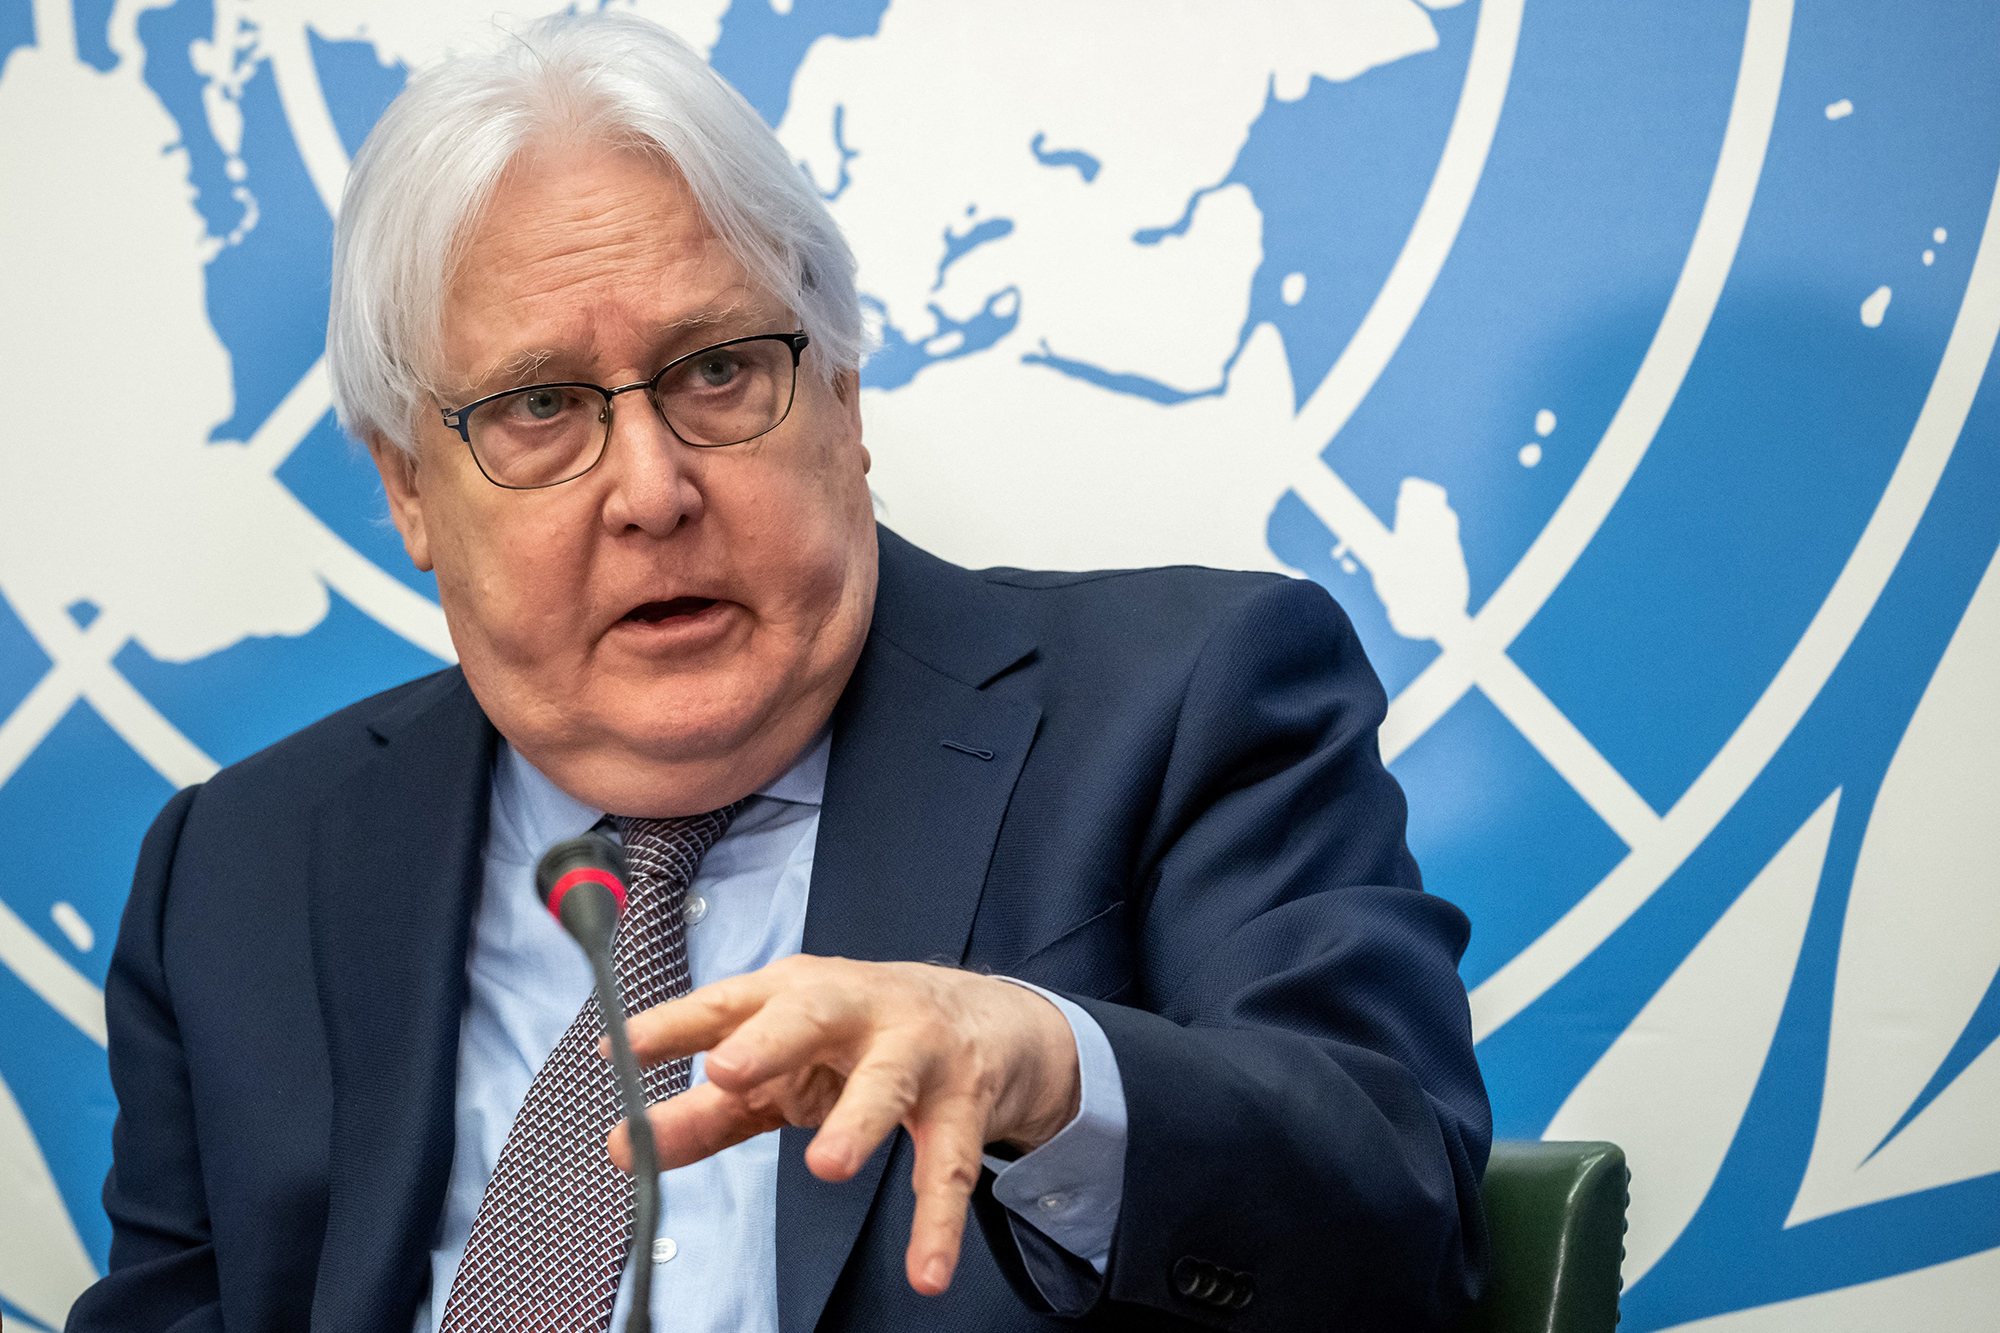 UN Emergency Relief Coordinator Martin Griffiths speaks during a joint press conference in Geneva, on February 27, 2023.